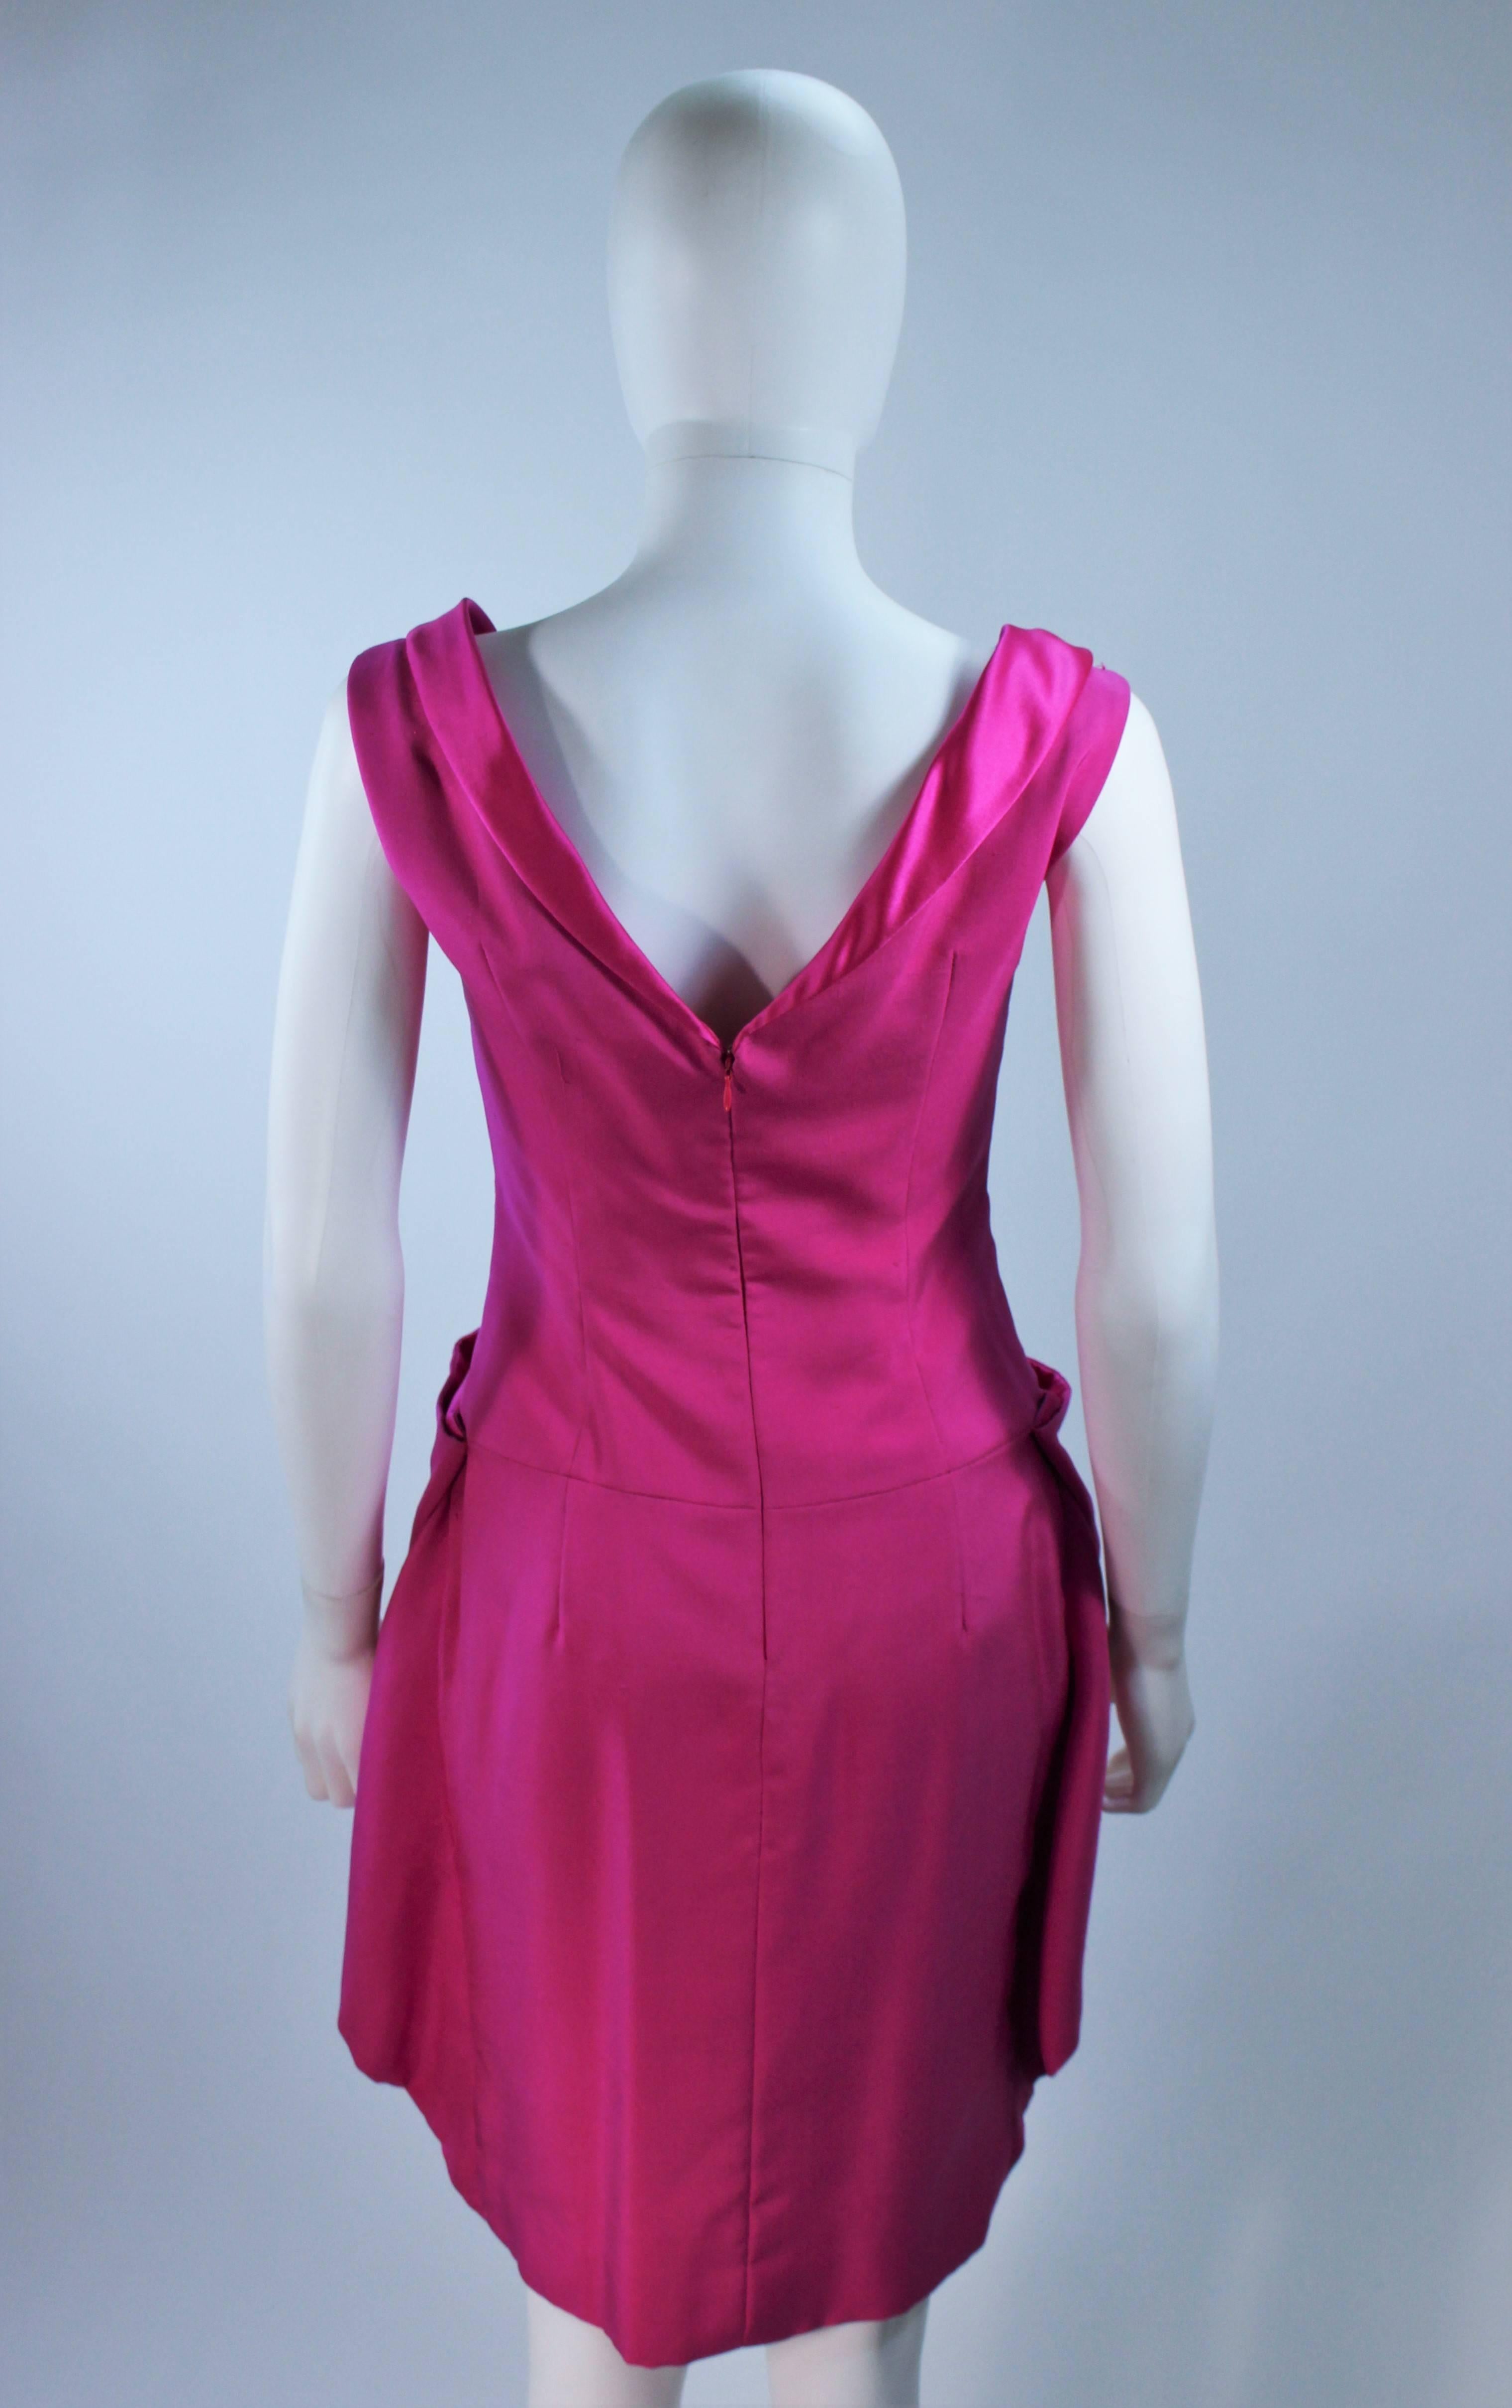 ELIZABETH MASON COUTURE Pink Magenta Bow Cocktail Dress Made to Order For Sale 5